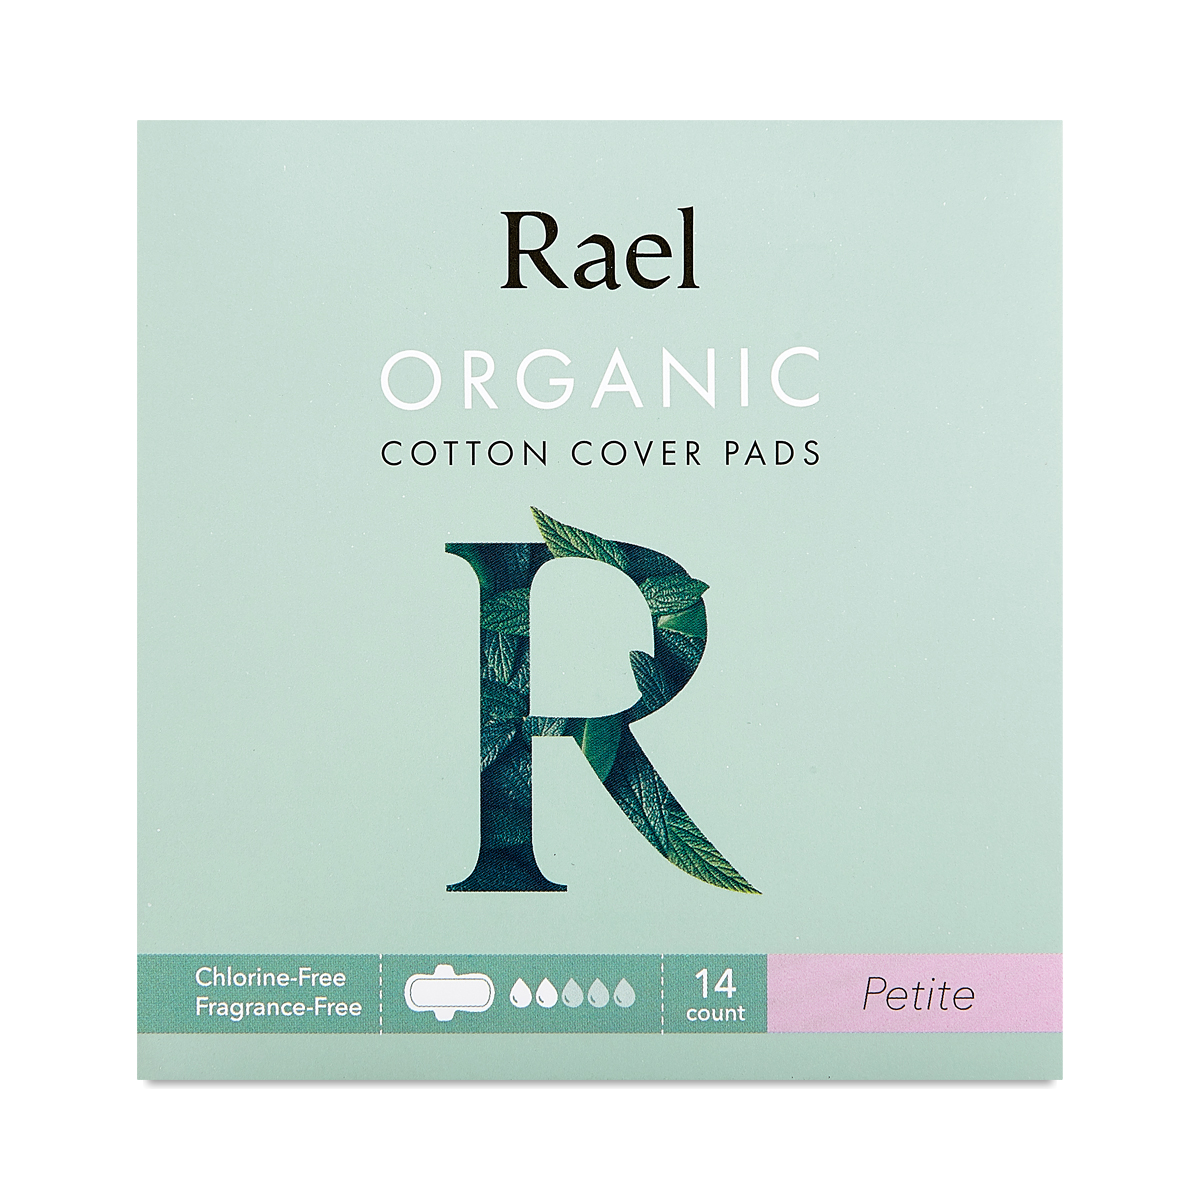 Rael Organic Cotton Cover Pads, Petite 14 count